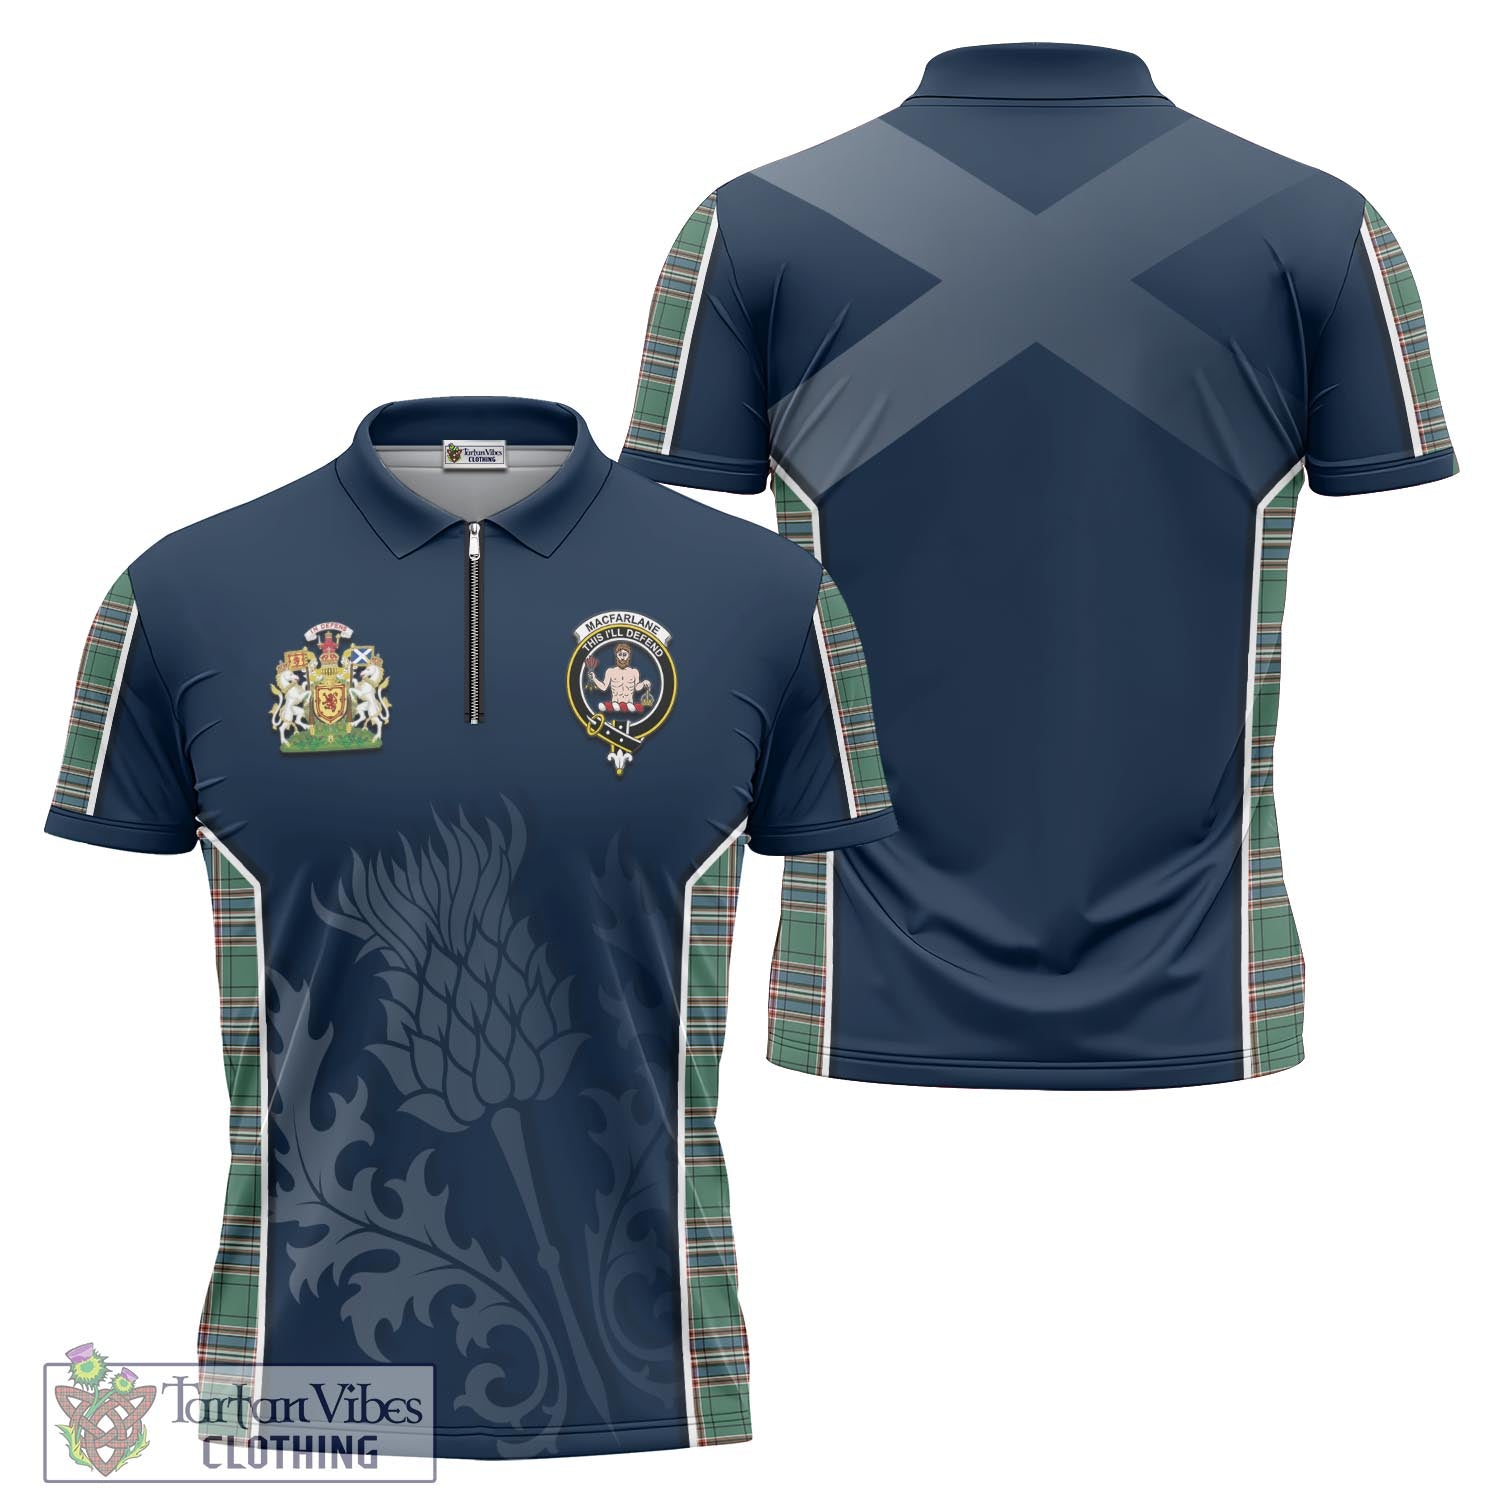 Tartan Vibes Clothing MacFarlane Hunting Ancient Tartan Zipper Polo Shirt with Family Crest and Scottish Thistle Vibes Sport Style